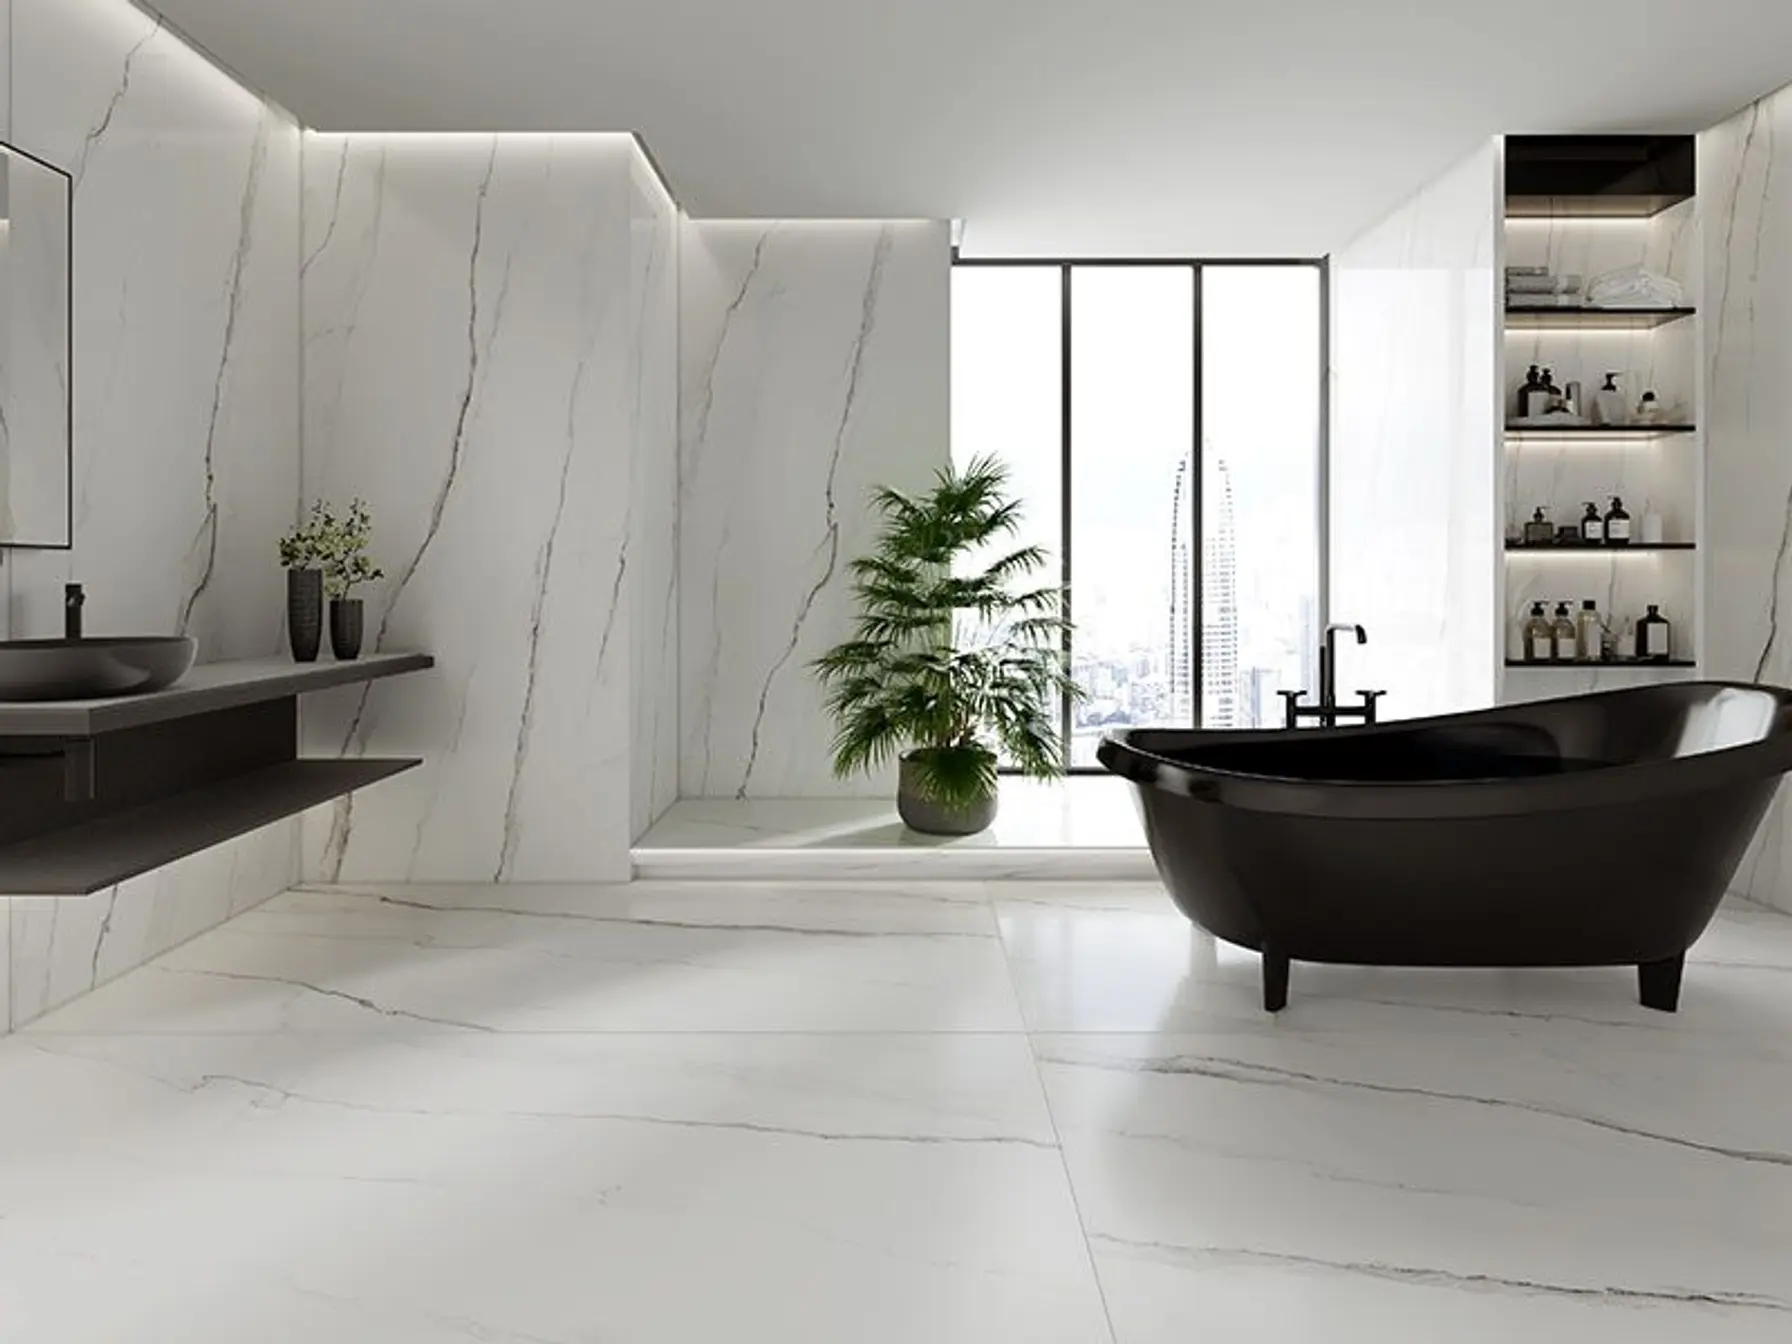 Tricks and practical accessories for the beauty of the bathroom